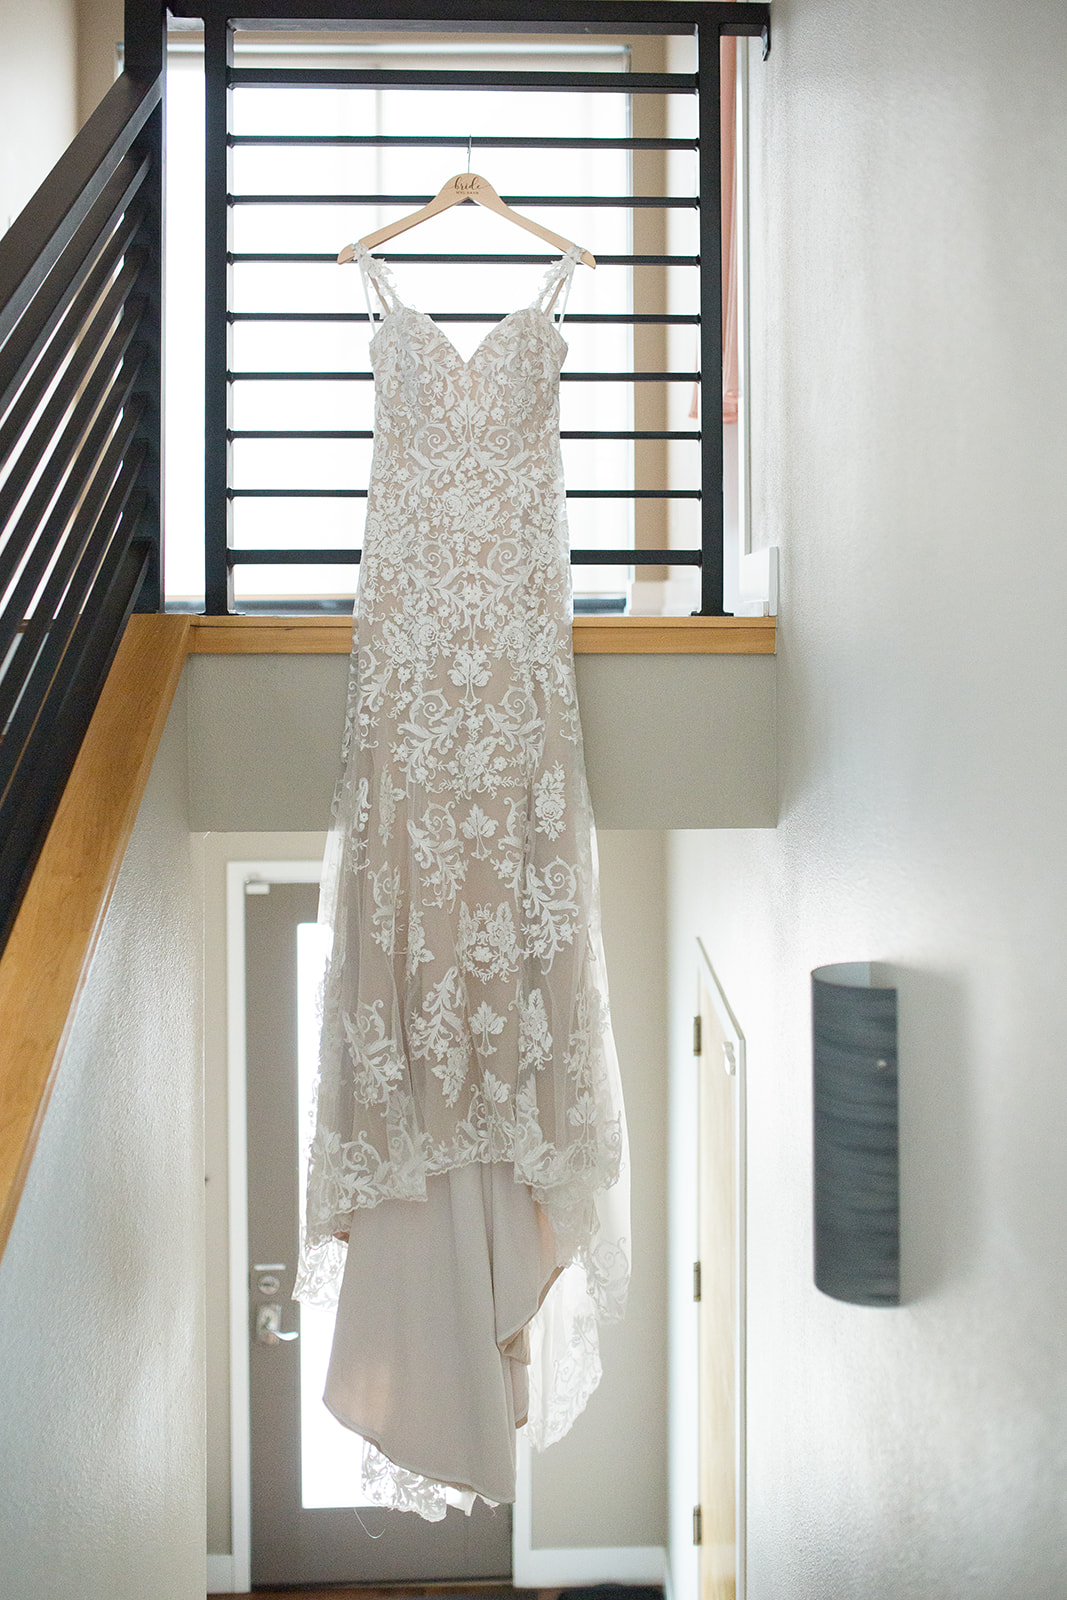 dress hanging on stairs